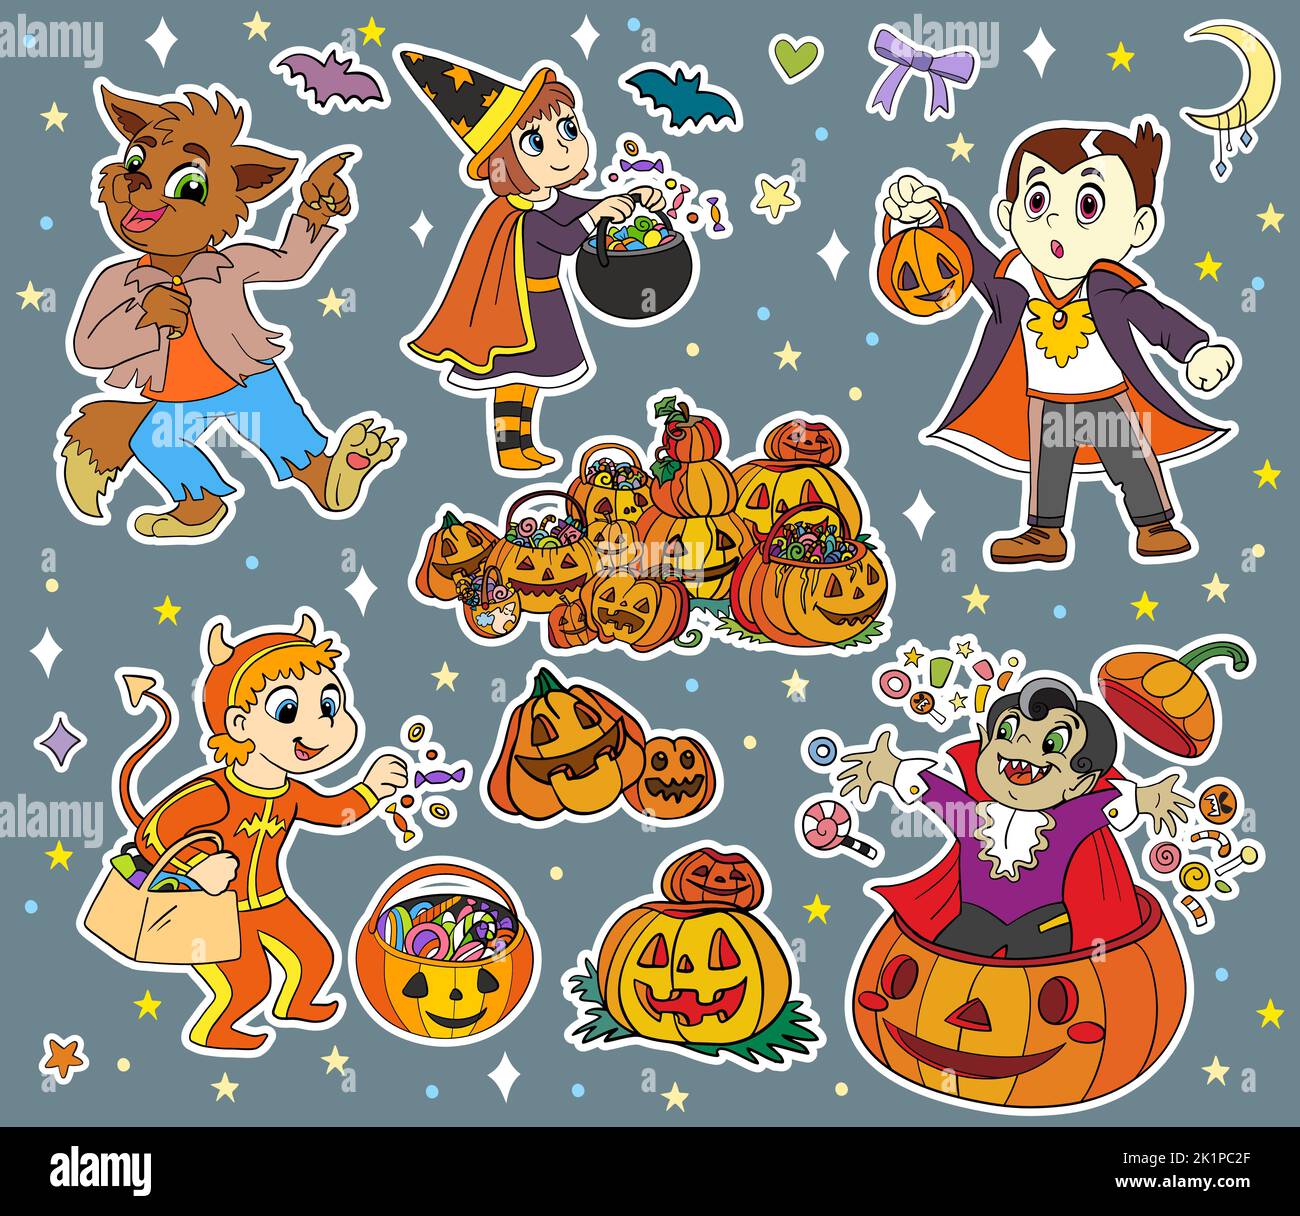 Halloween characters and elements sticker set. Witch, vampire, werewolf. Halloween concept. Vector cartoon illustration. For stickers, cards, design, Stock Vector